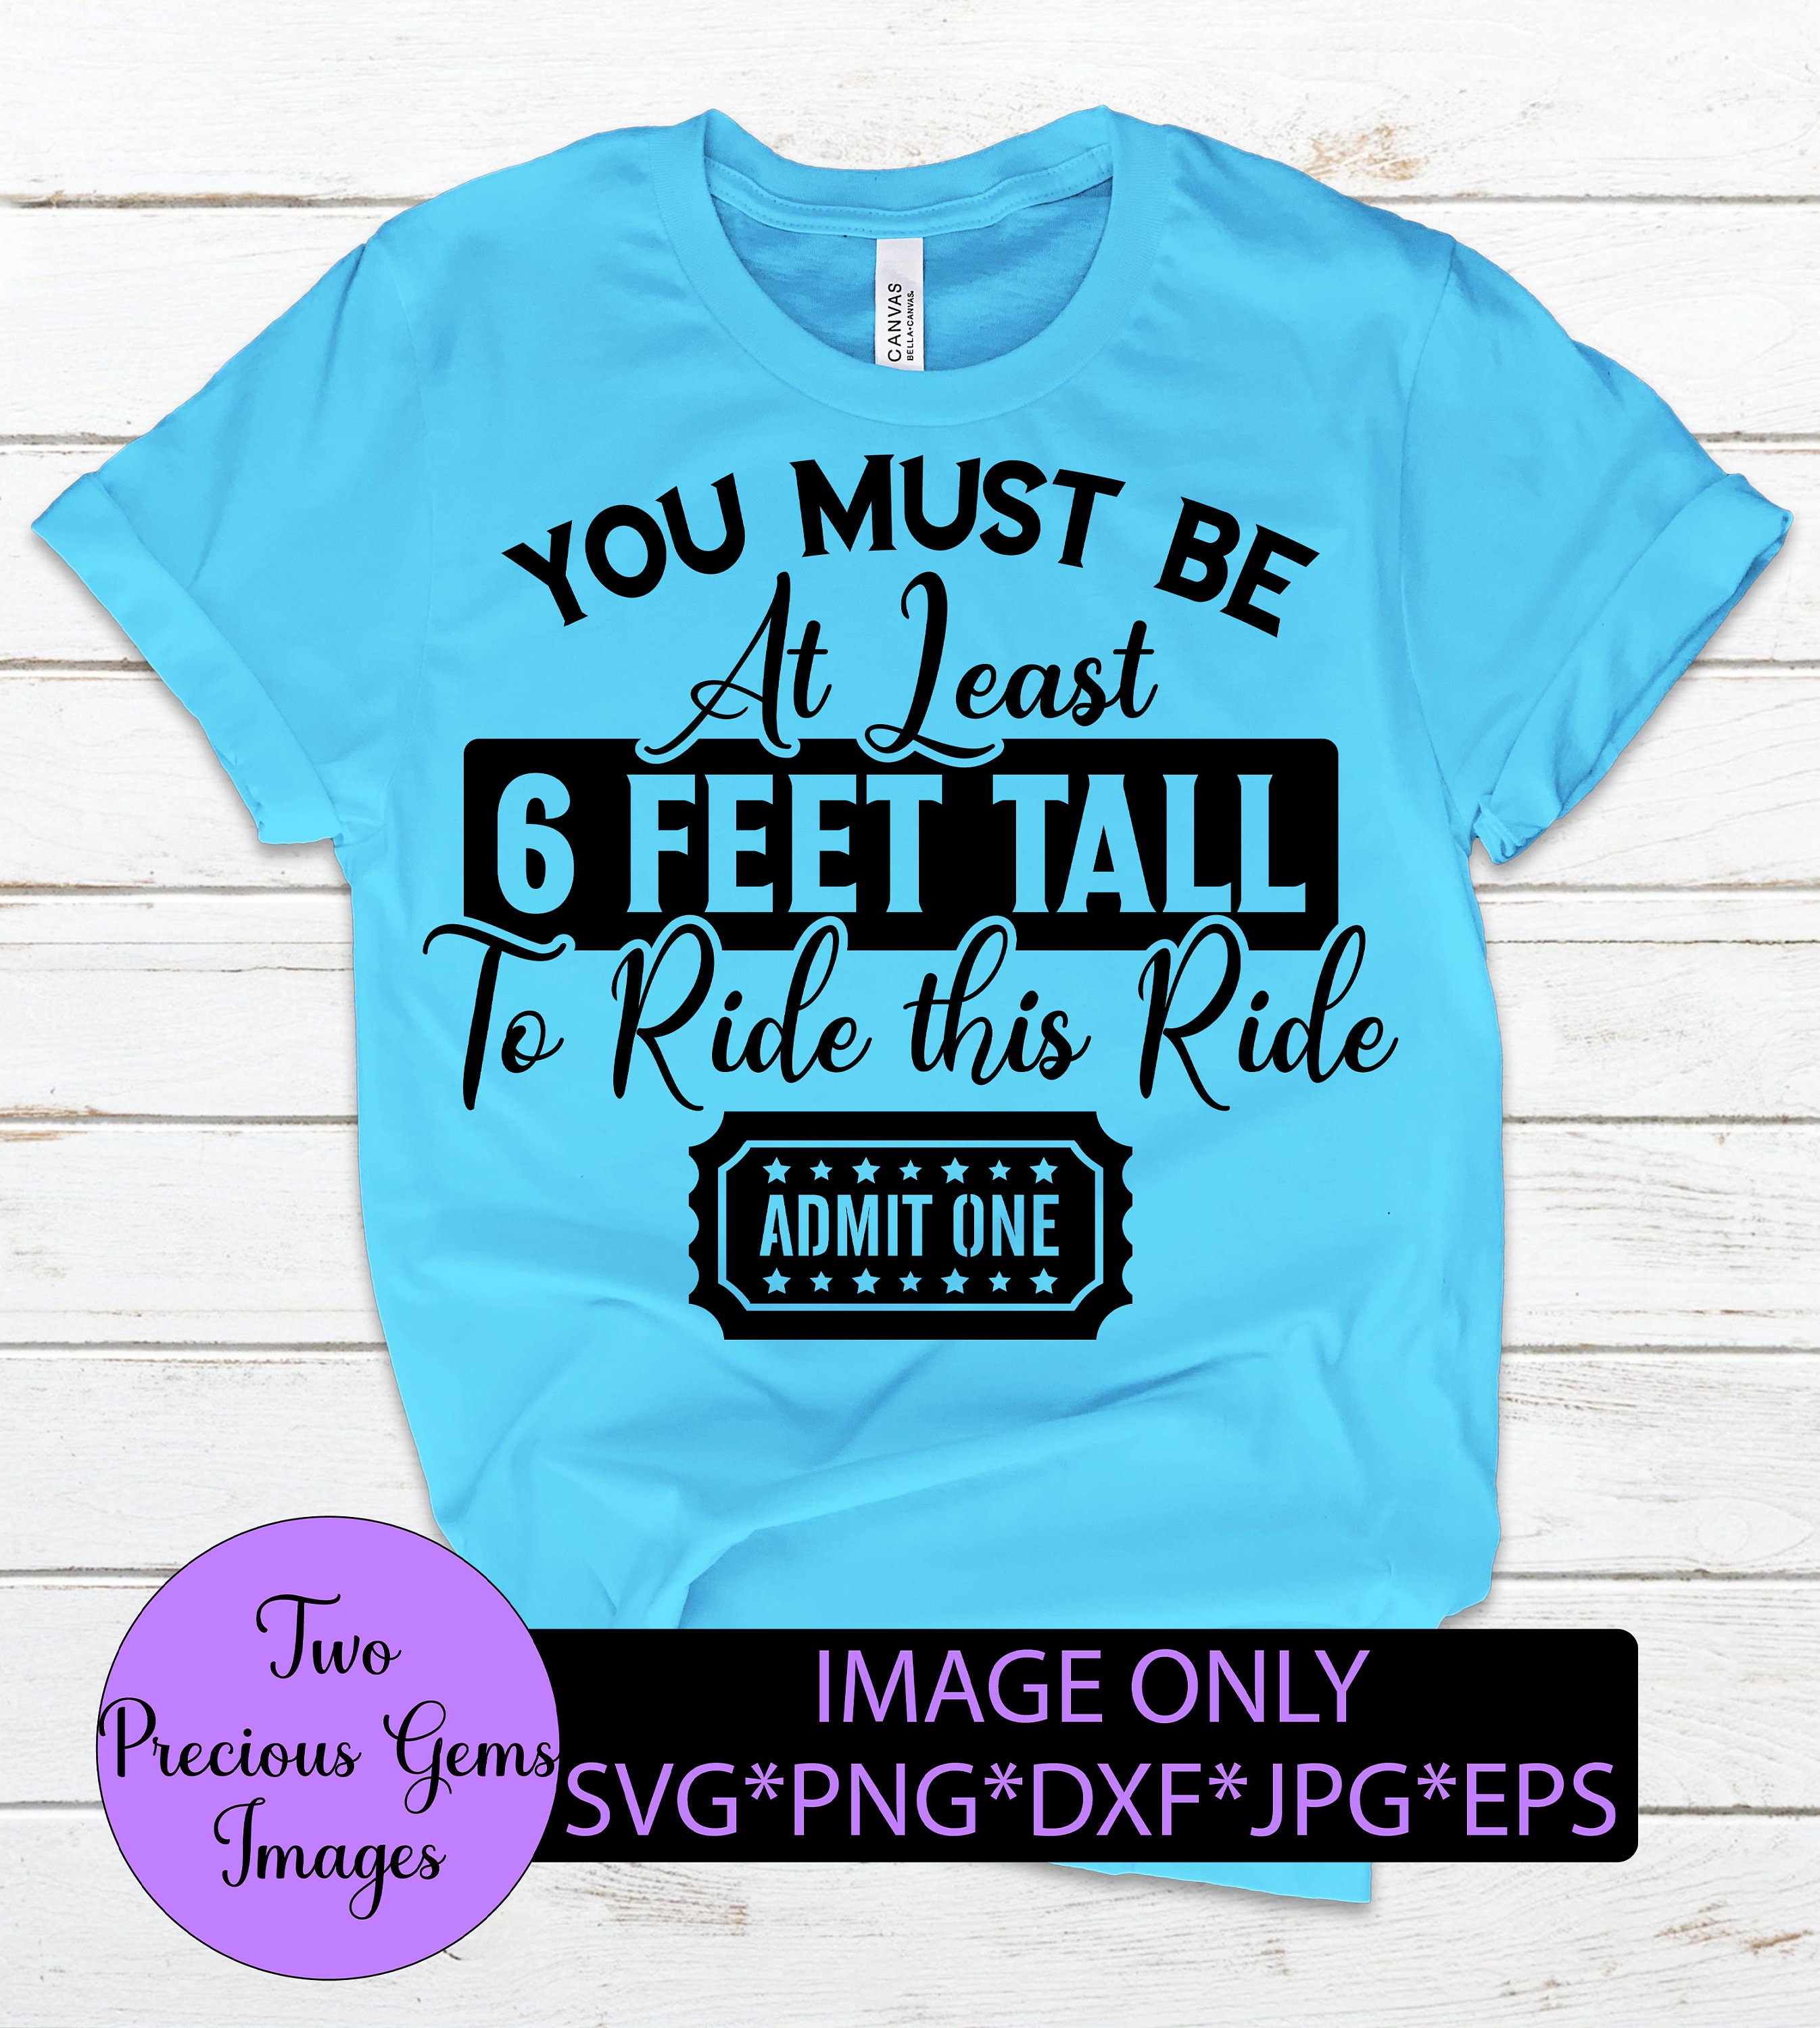 You Must Be at Least Six Feet Tall to Ride This Ride. Adult Humor